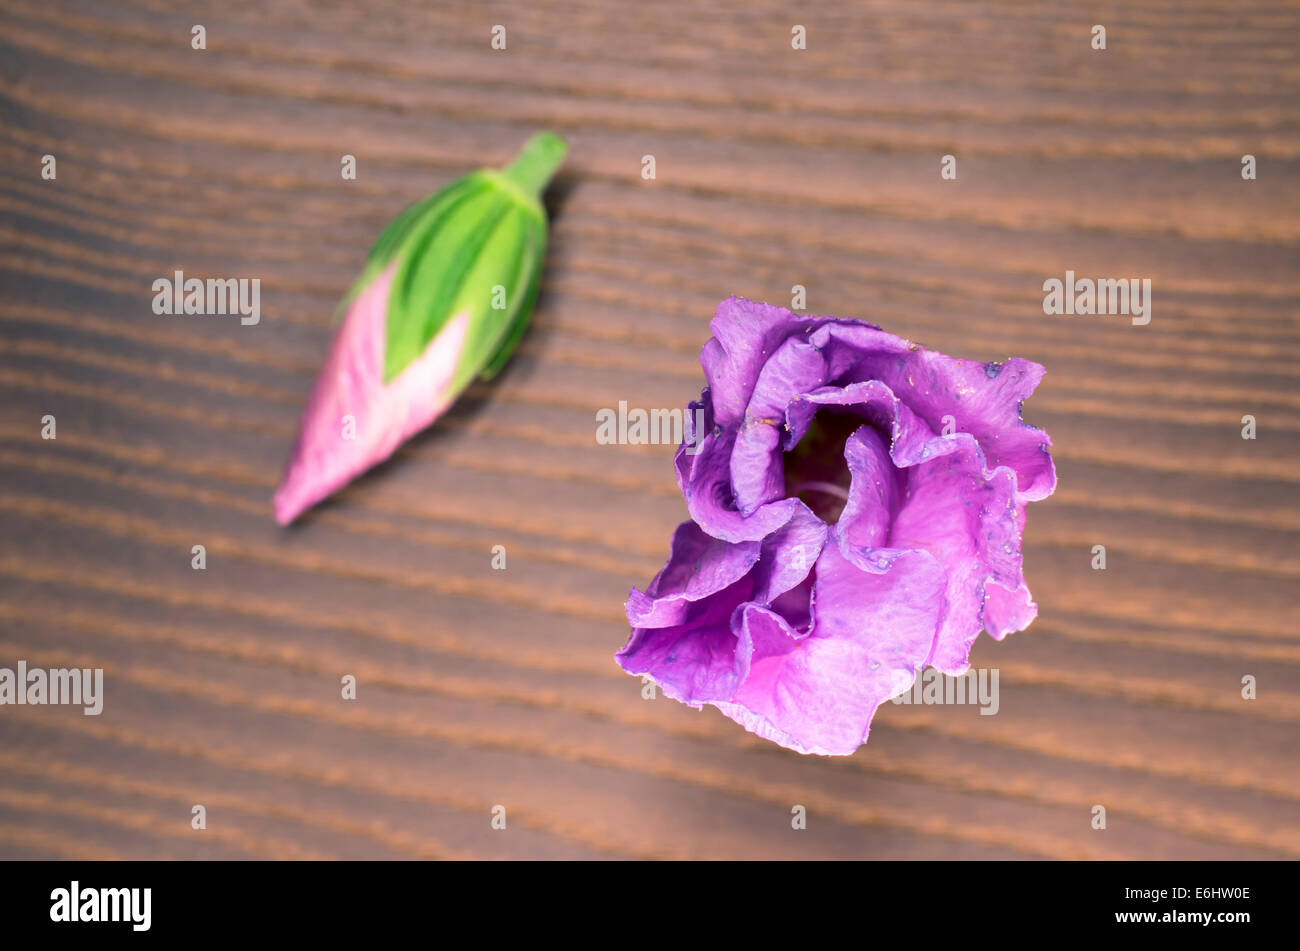 hibiscus cannabinus blossom on a wood surface Stock Photo